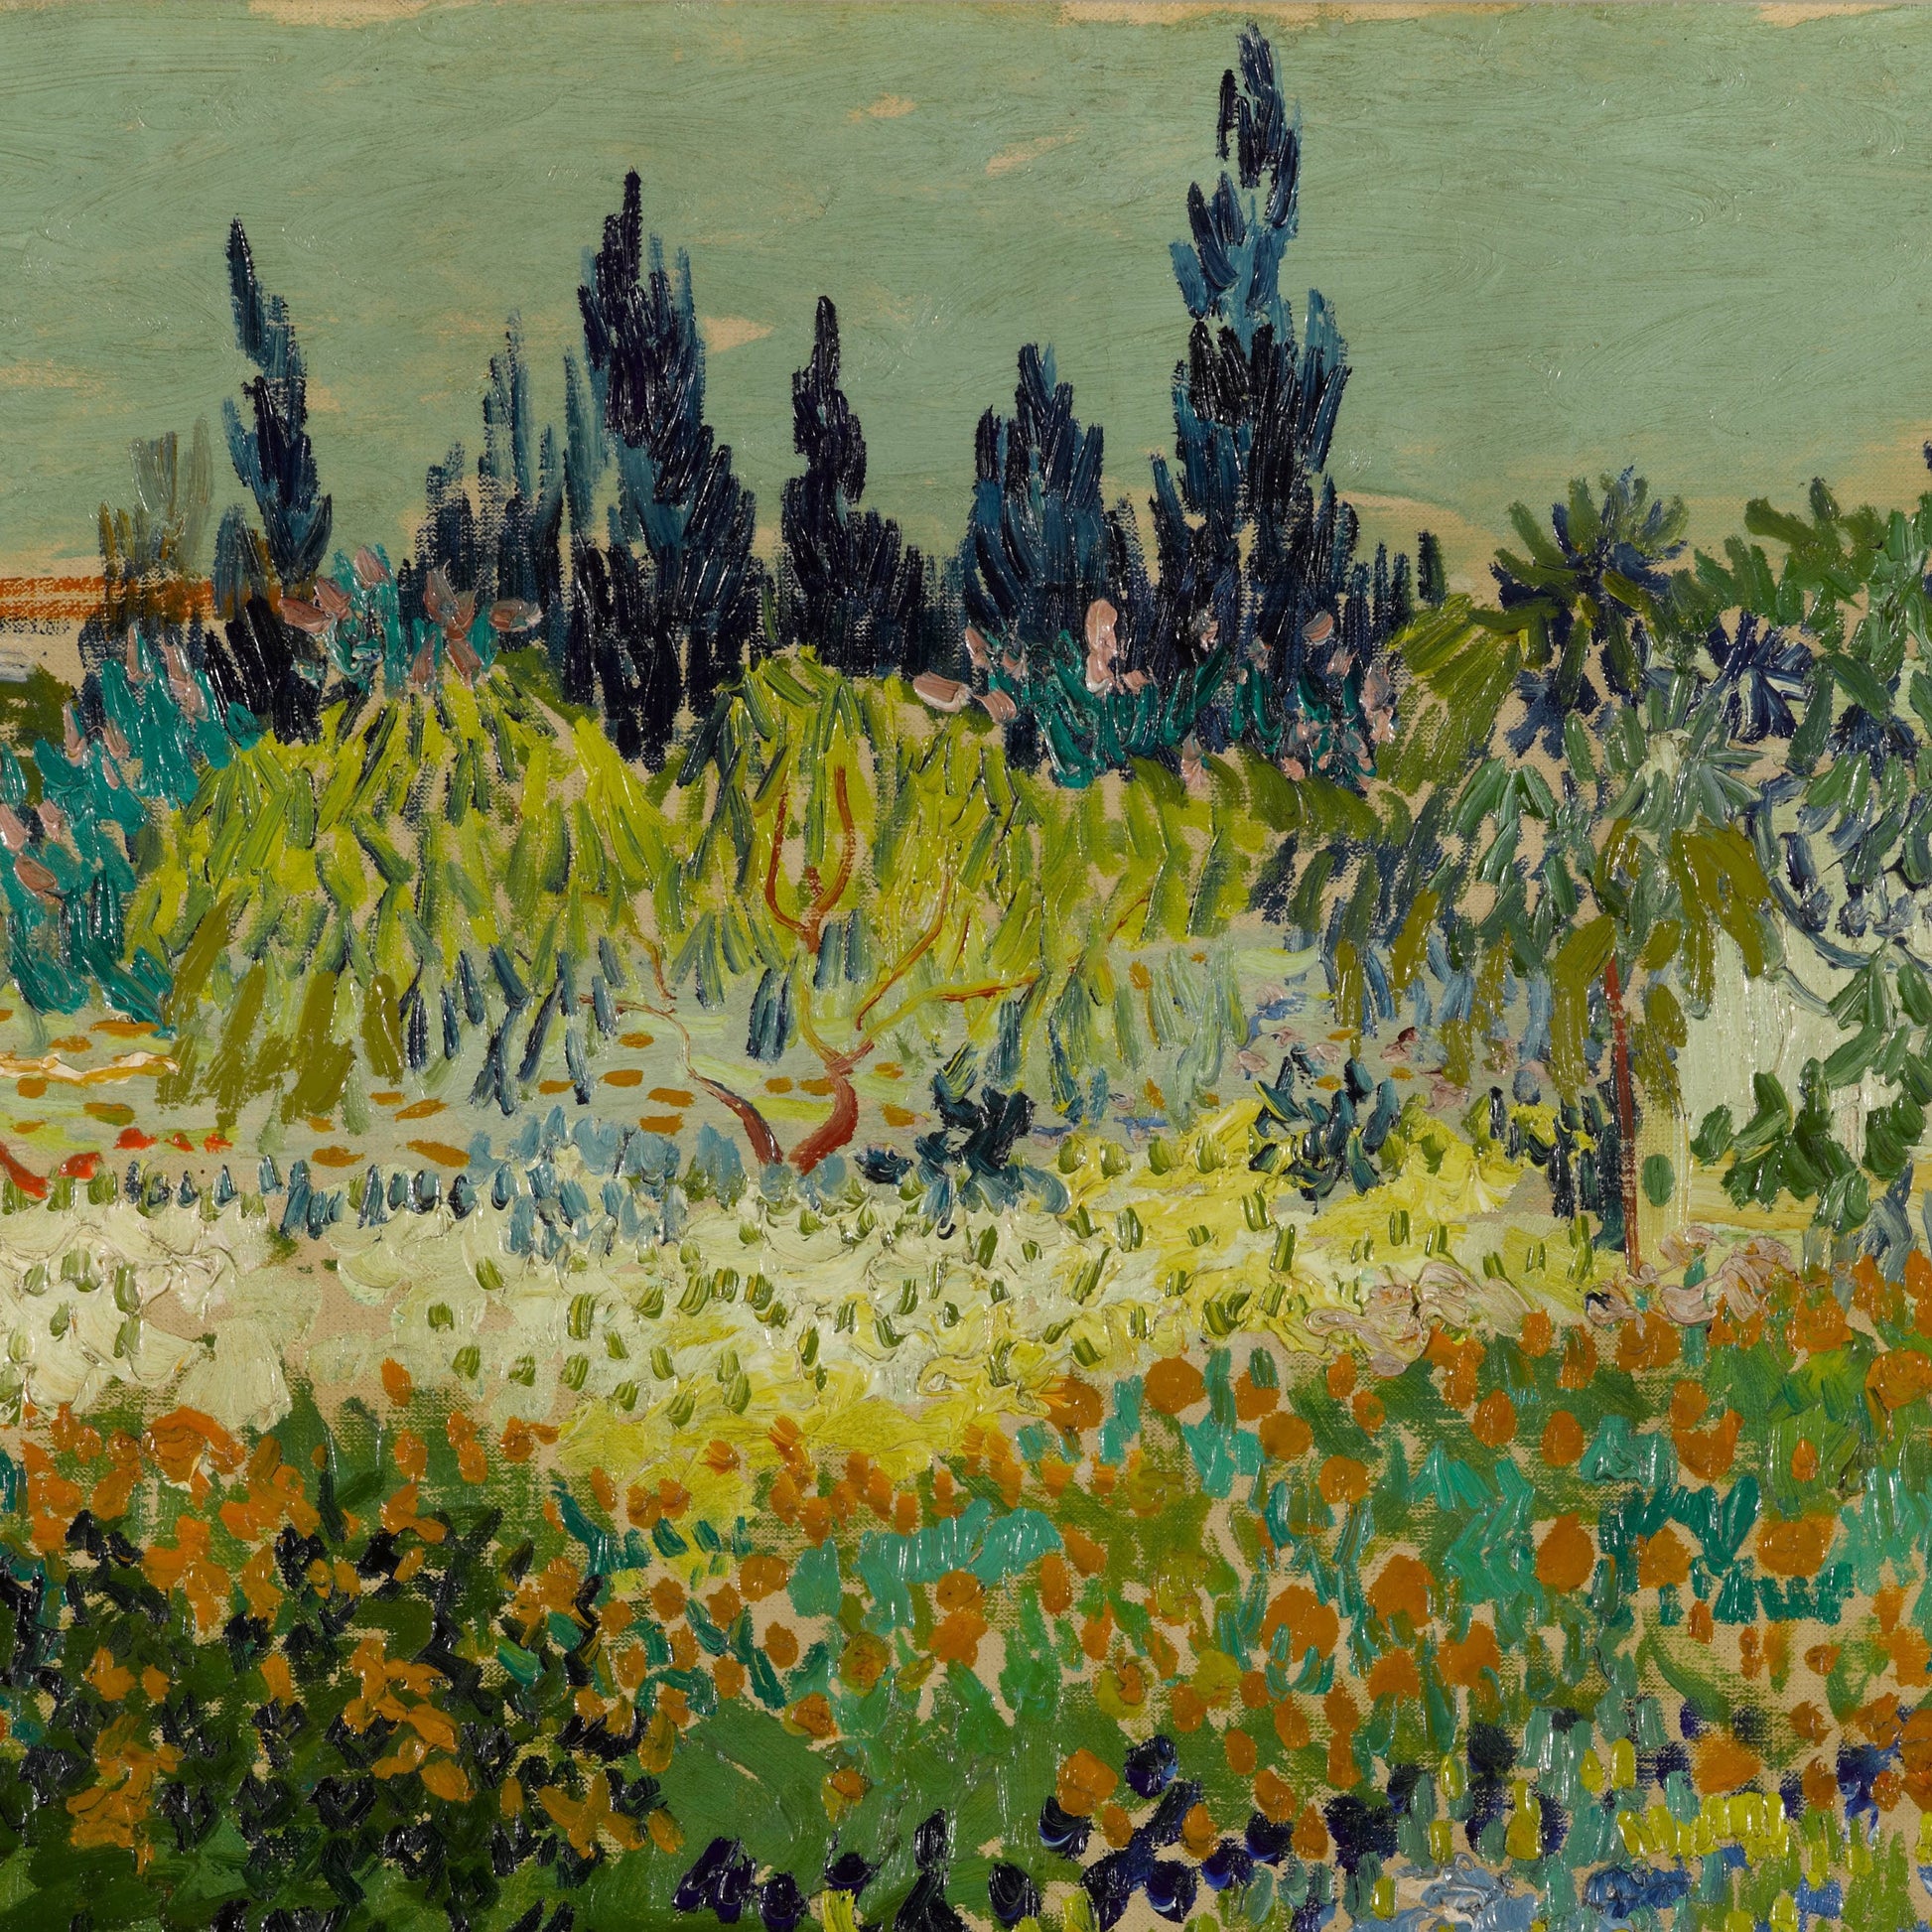 Garden at Arles by Vincent Van Gogh, 3d Printed with texture and brush strokes looks like original oil-painting, code:059